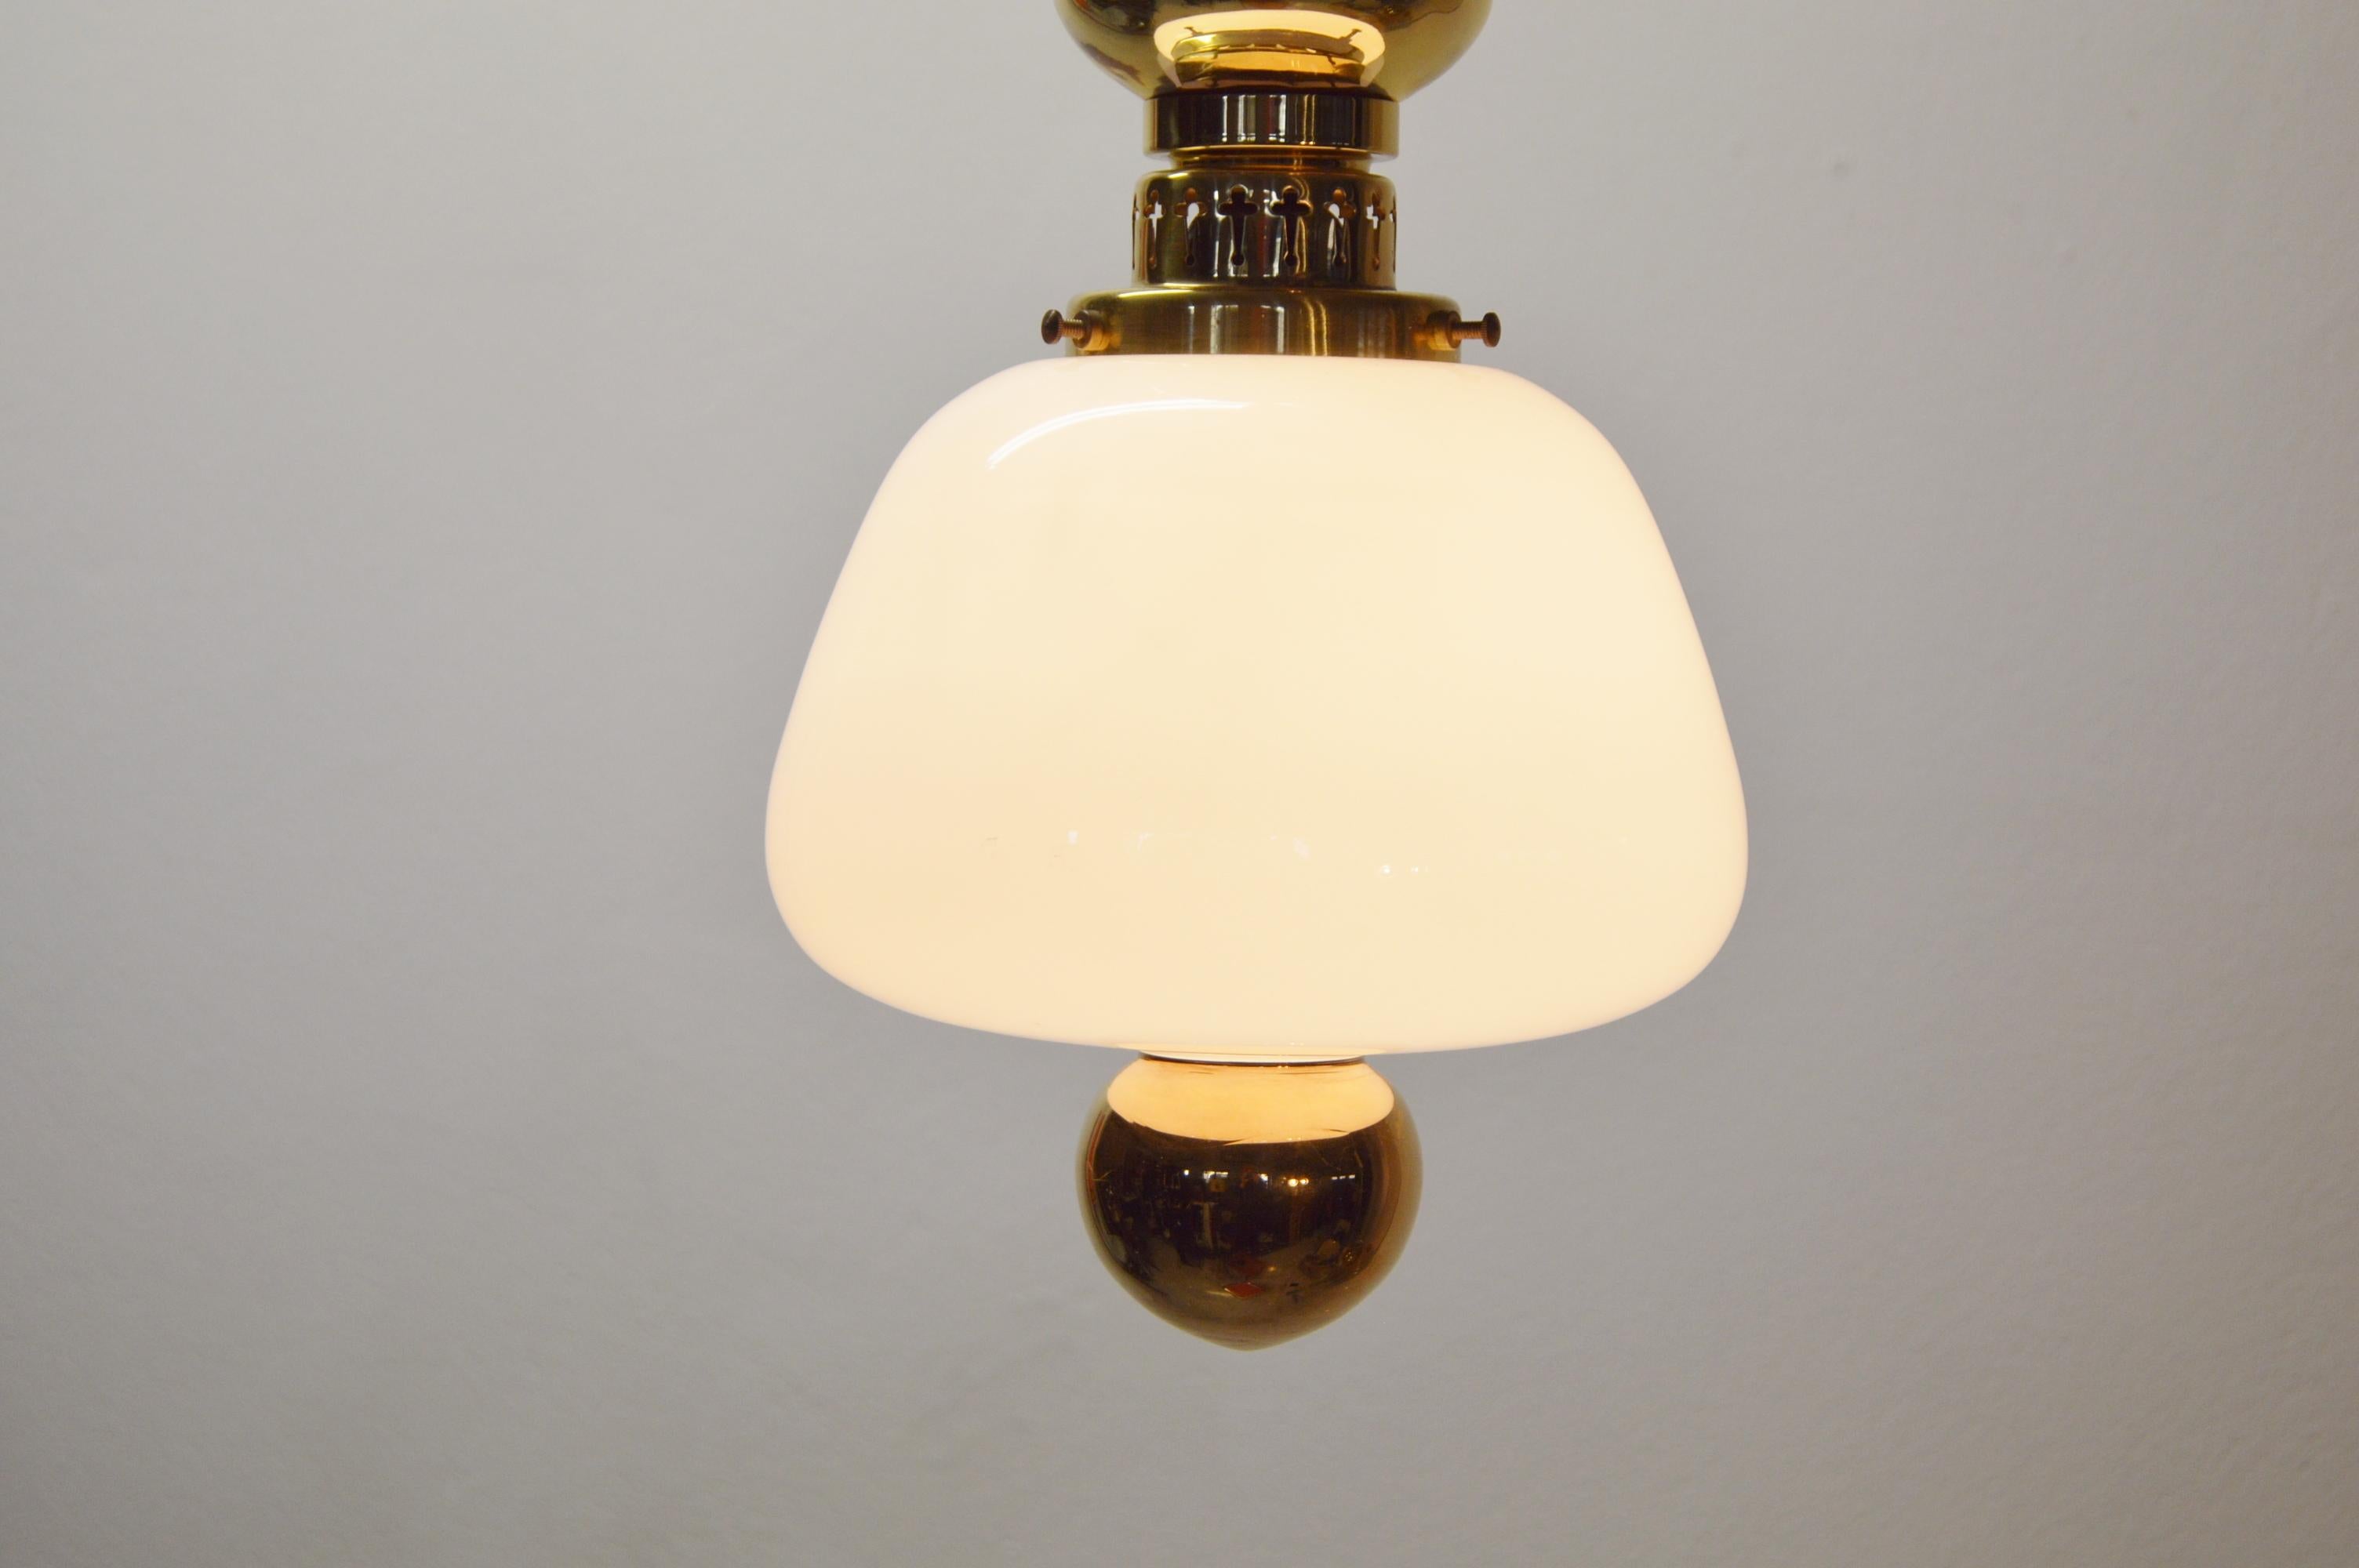 Rare ceiling lamp designed by Hans-Agne Jakobsson.
Glass and brass details with the of Hans-Agne characteristic pattern. 
Gold colored glass in bottom, followed by white opaline glass and then brass. 
The height is adjustable thanks to the